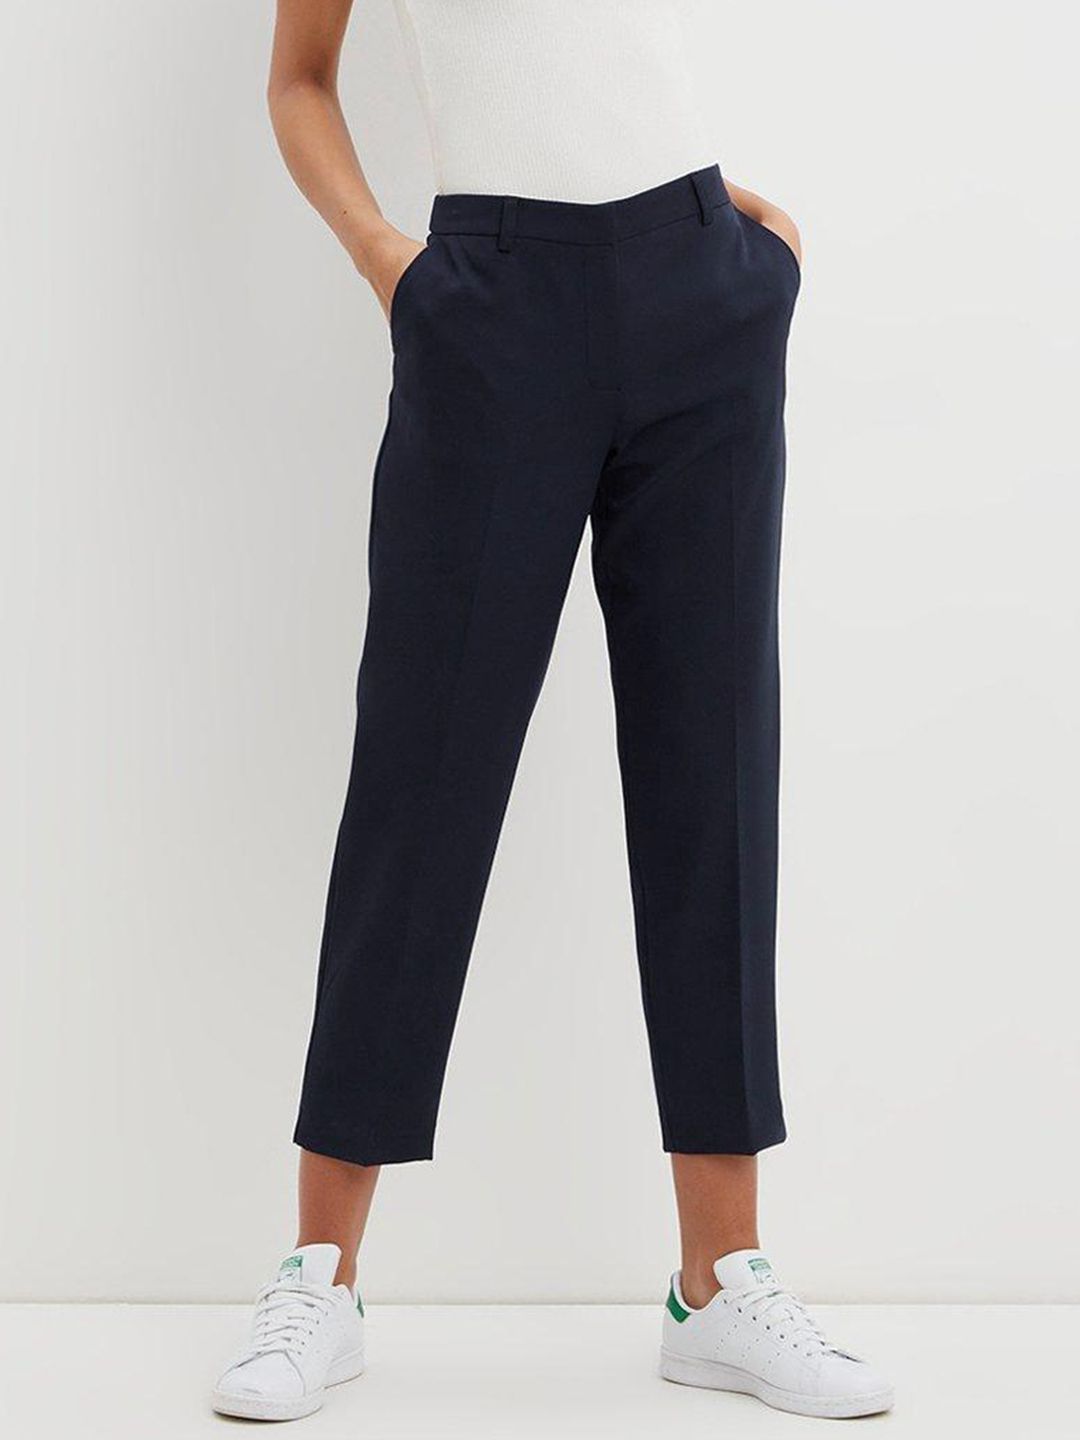 DOROTHY PERKINS Women Slim Fit Pleated Trousers Price in India